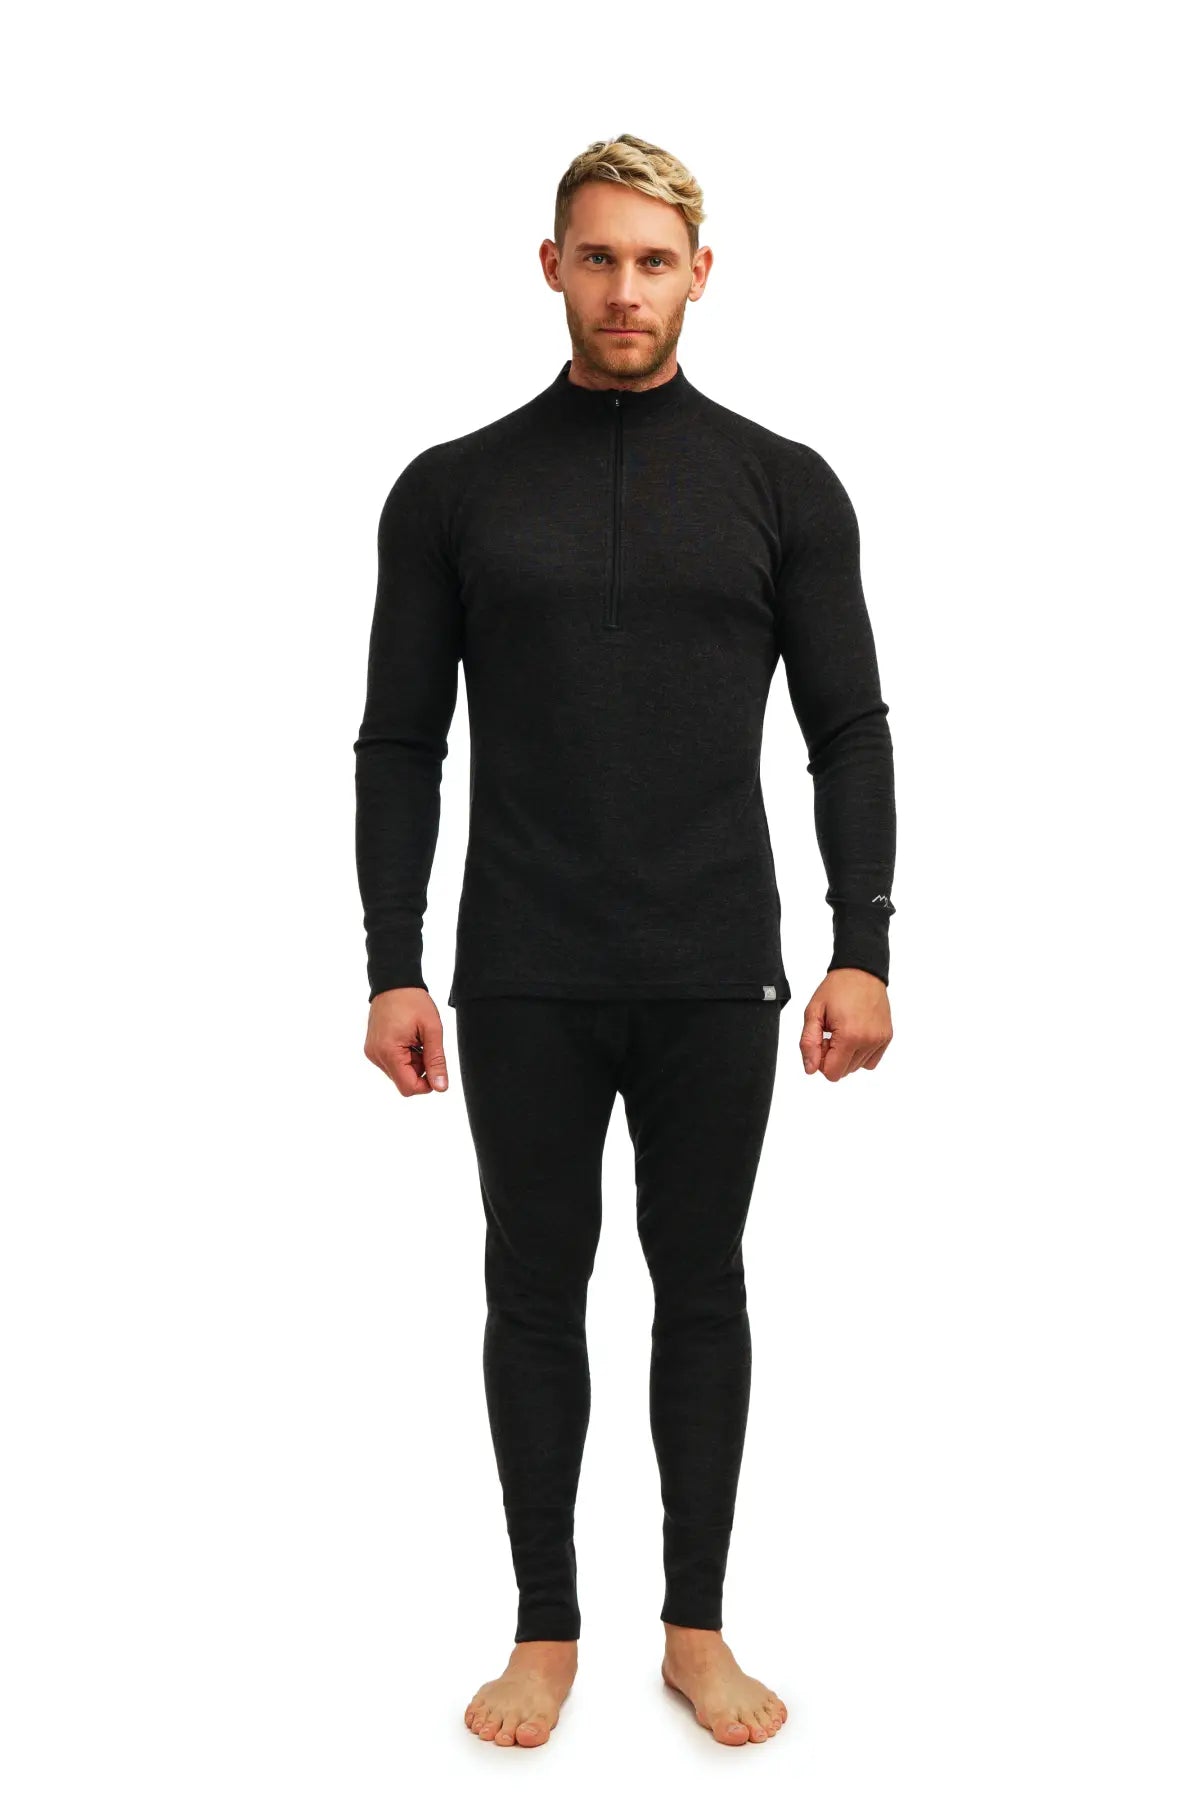 Men's Heavyweight [320] Merino Wool Thermal Sets for Extreme Warmth –  Merino Tech